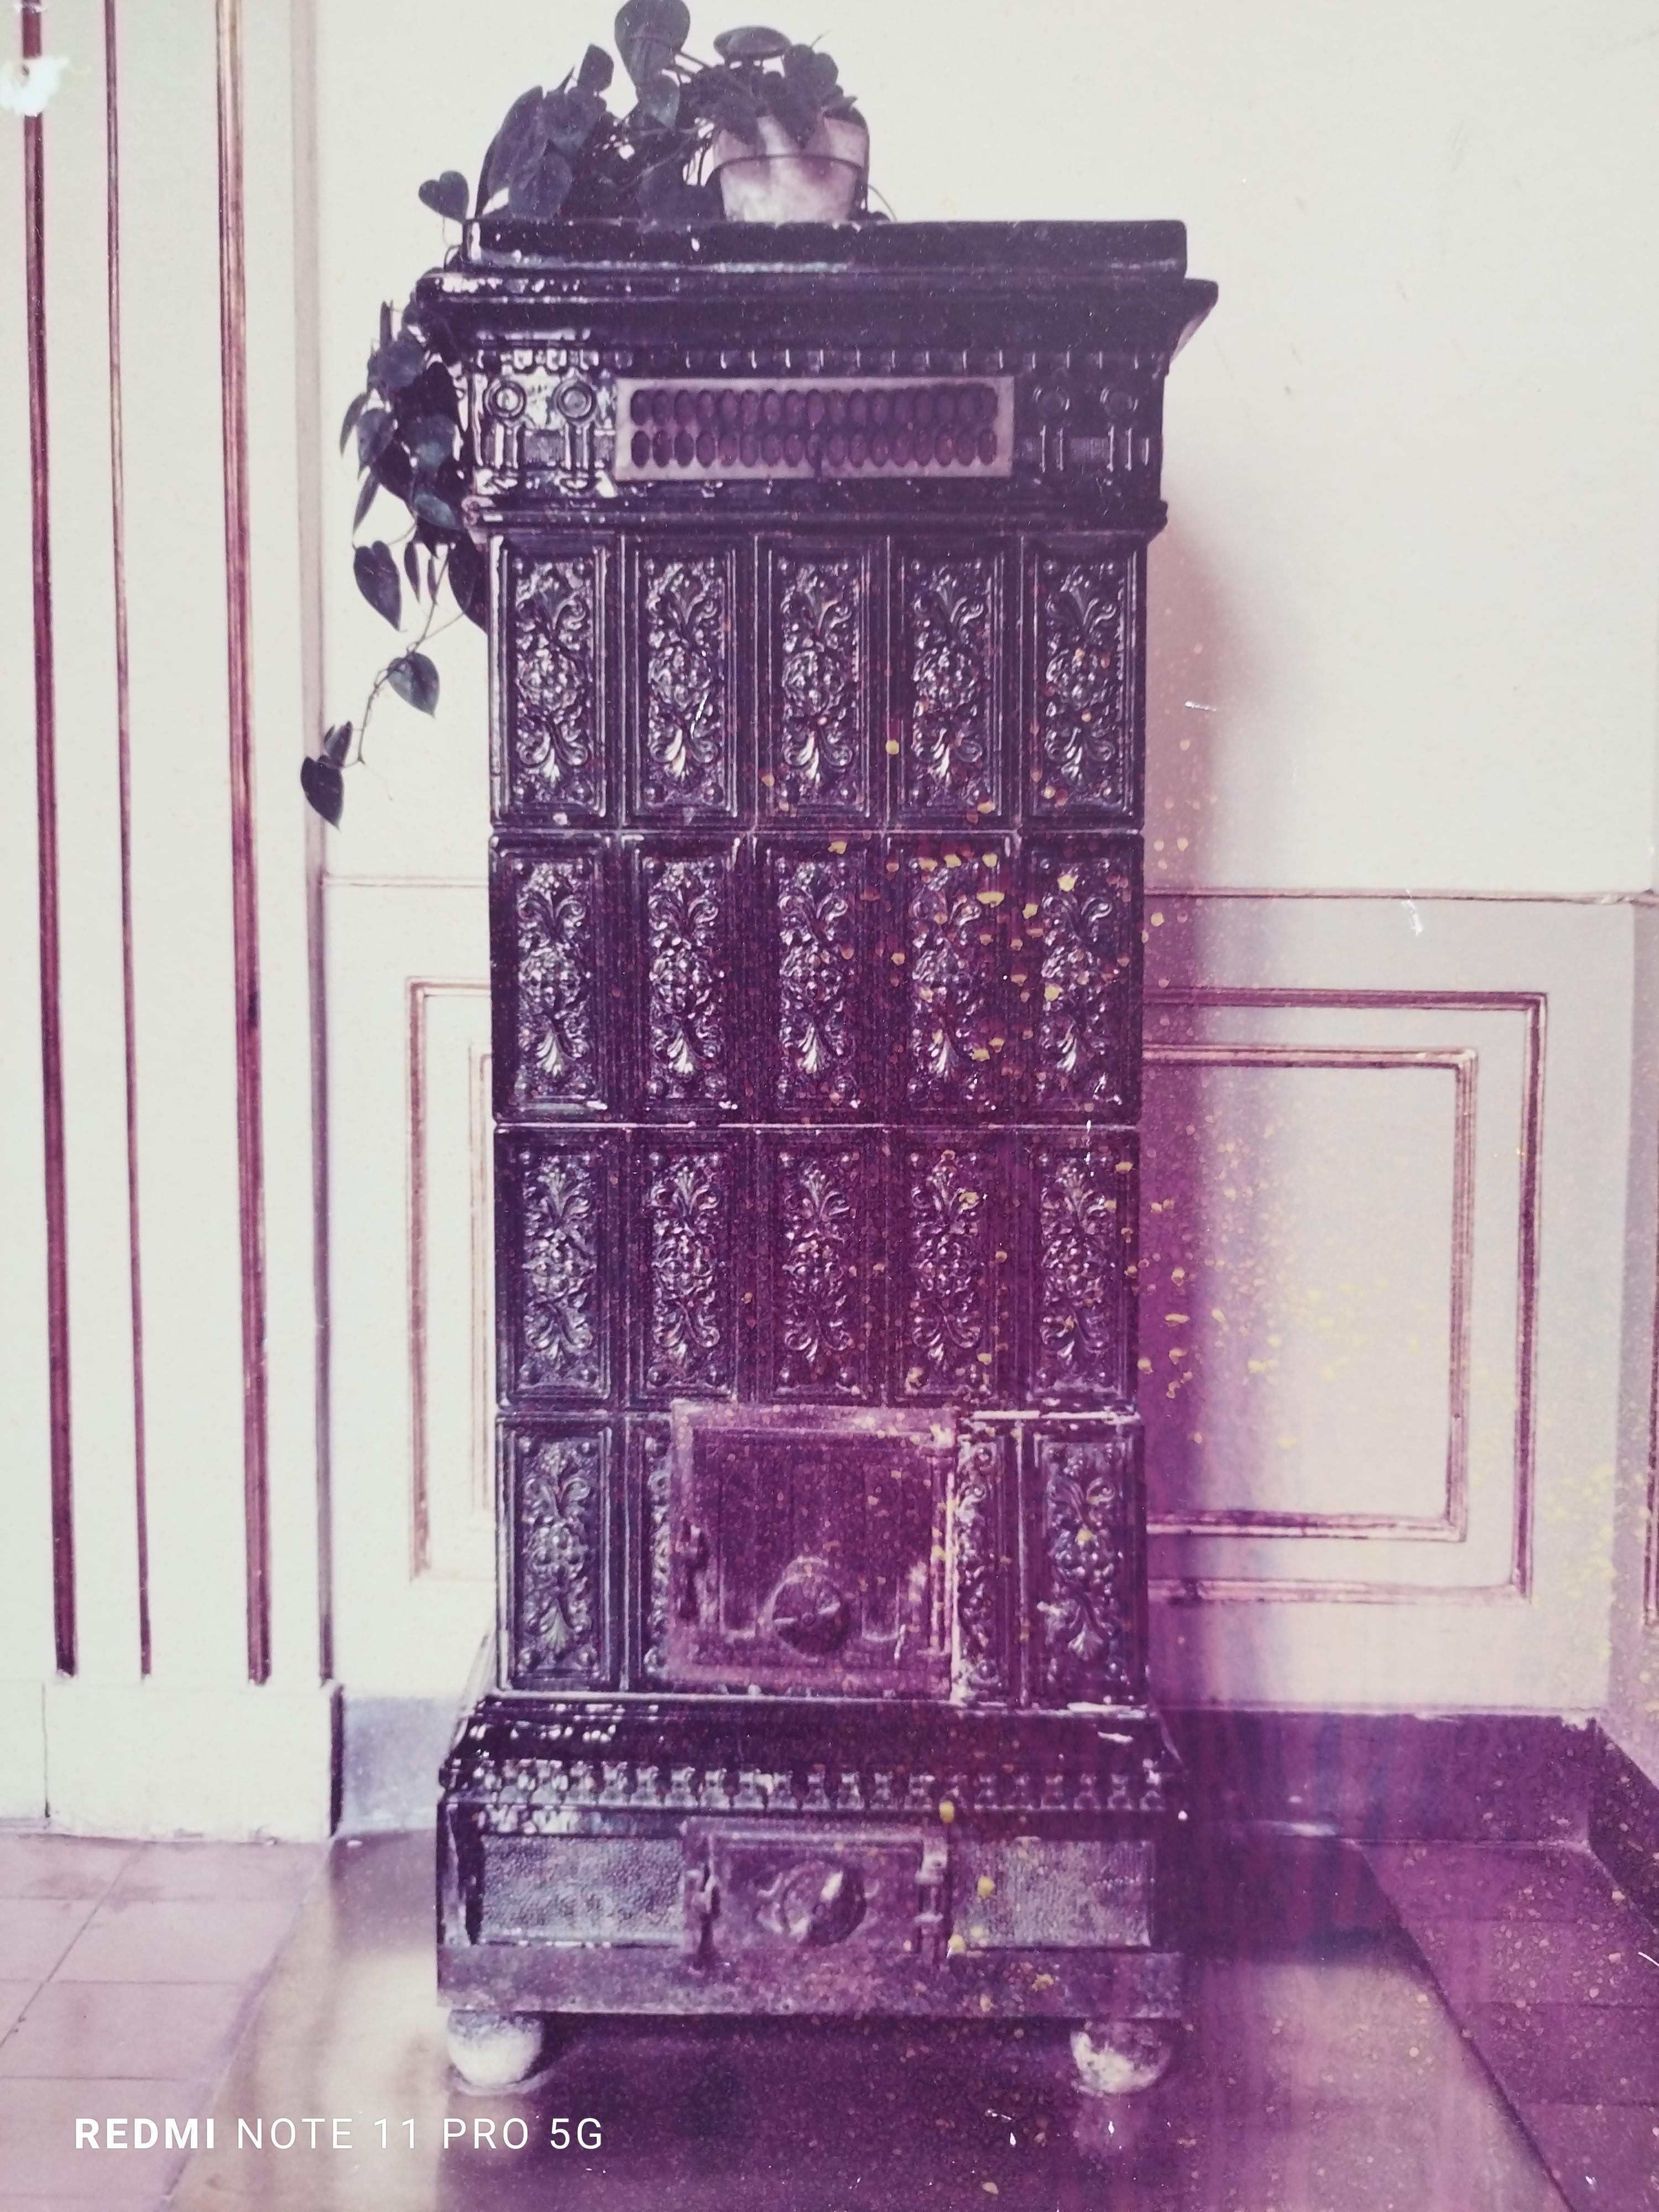 Photograph on analog and photographic paper, signed and dated on back 1992. It depicts an antique stove, and the photo has been antiqued with a beautiful sepia effect, 